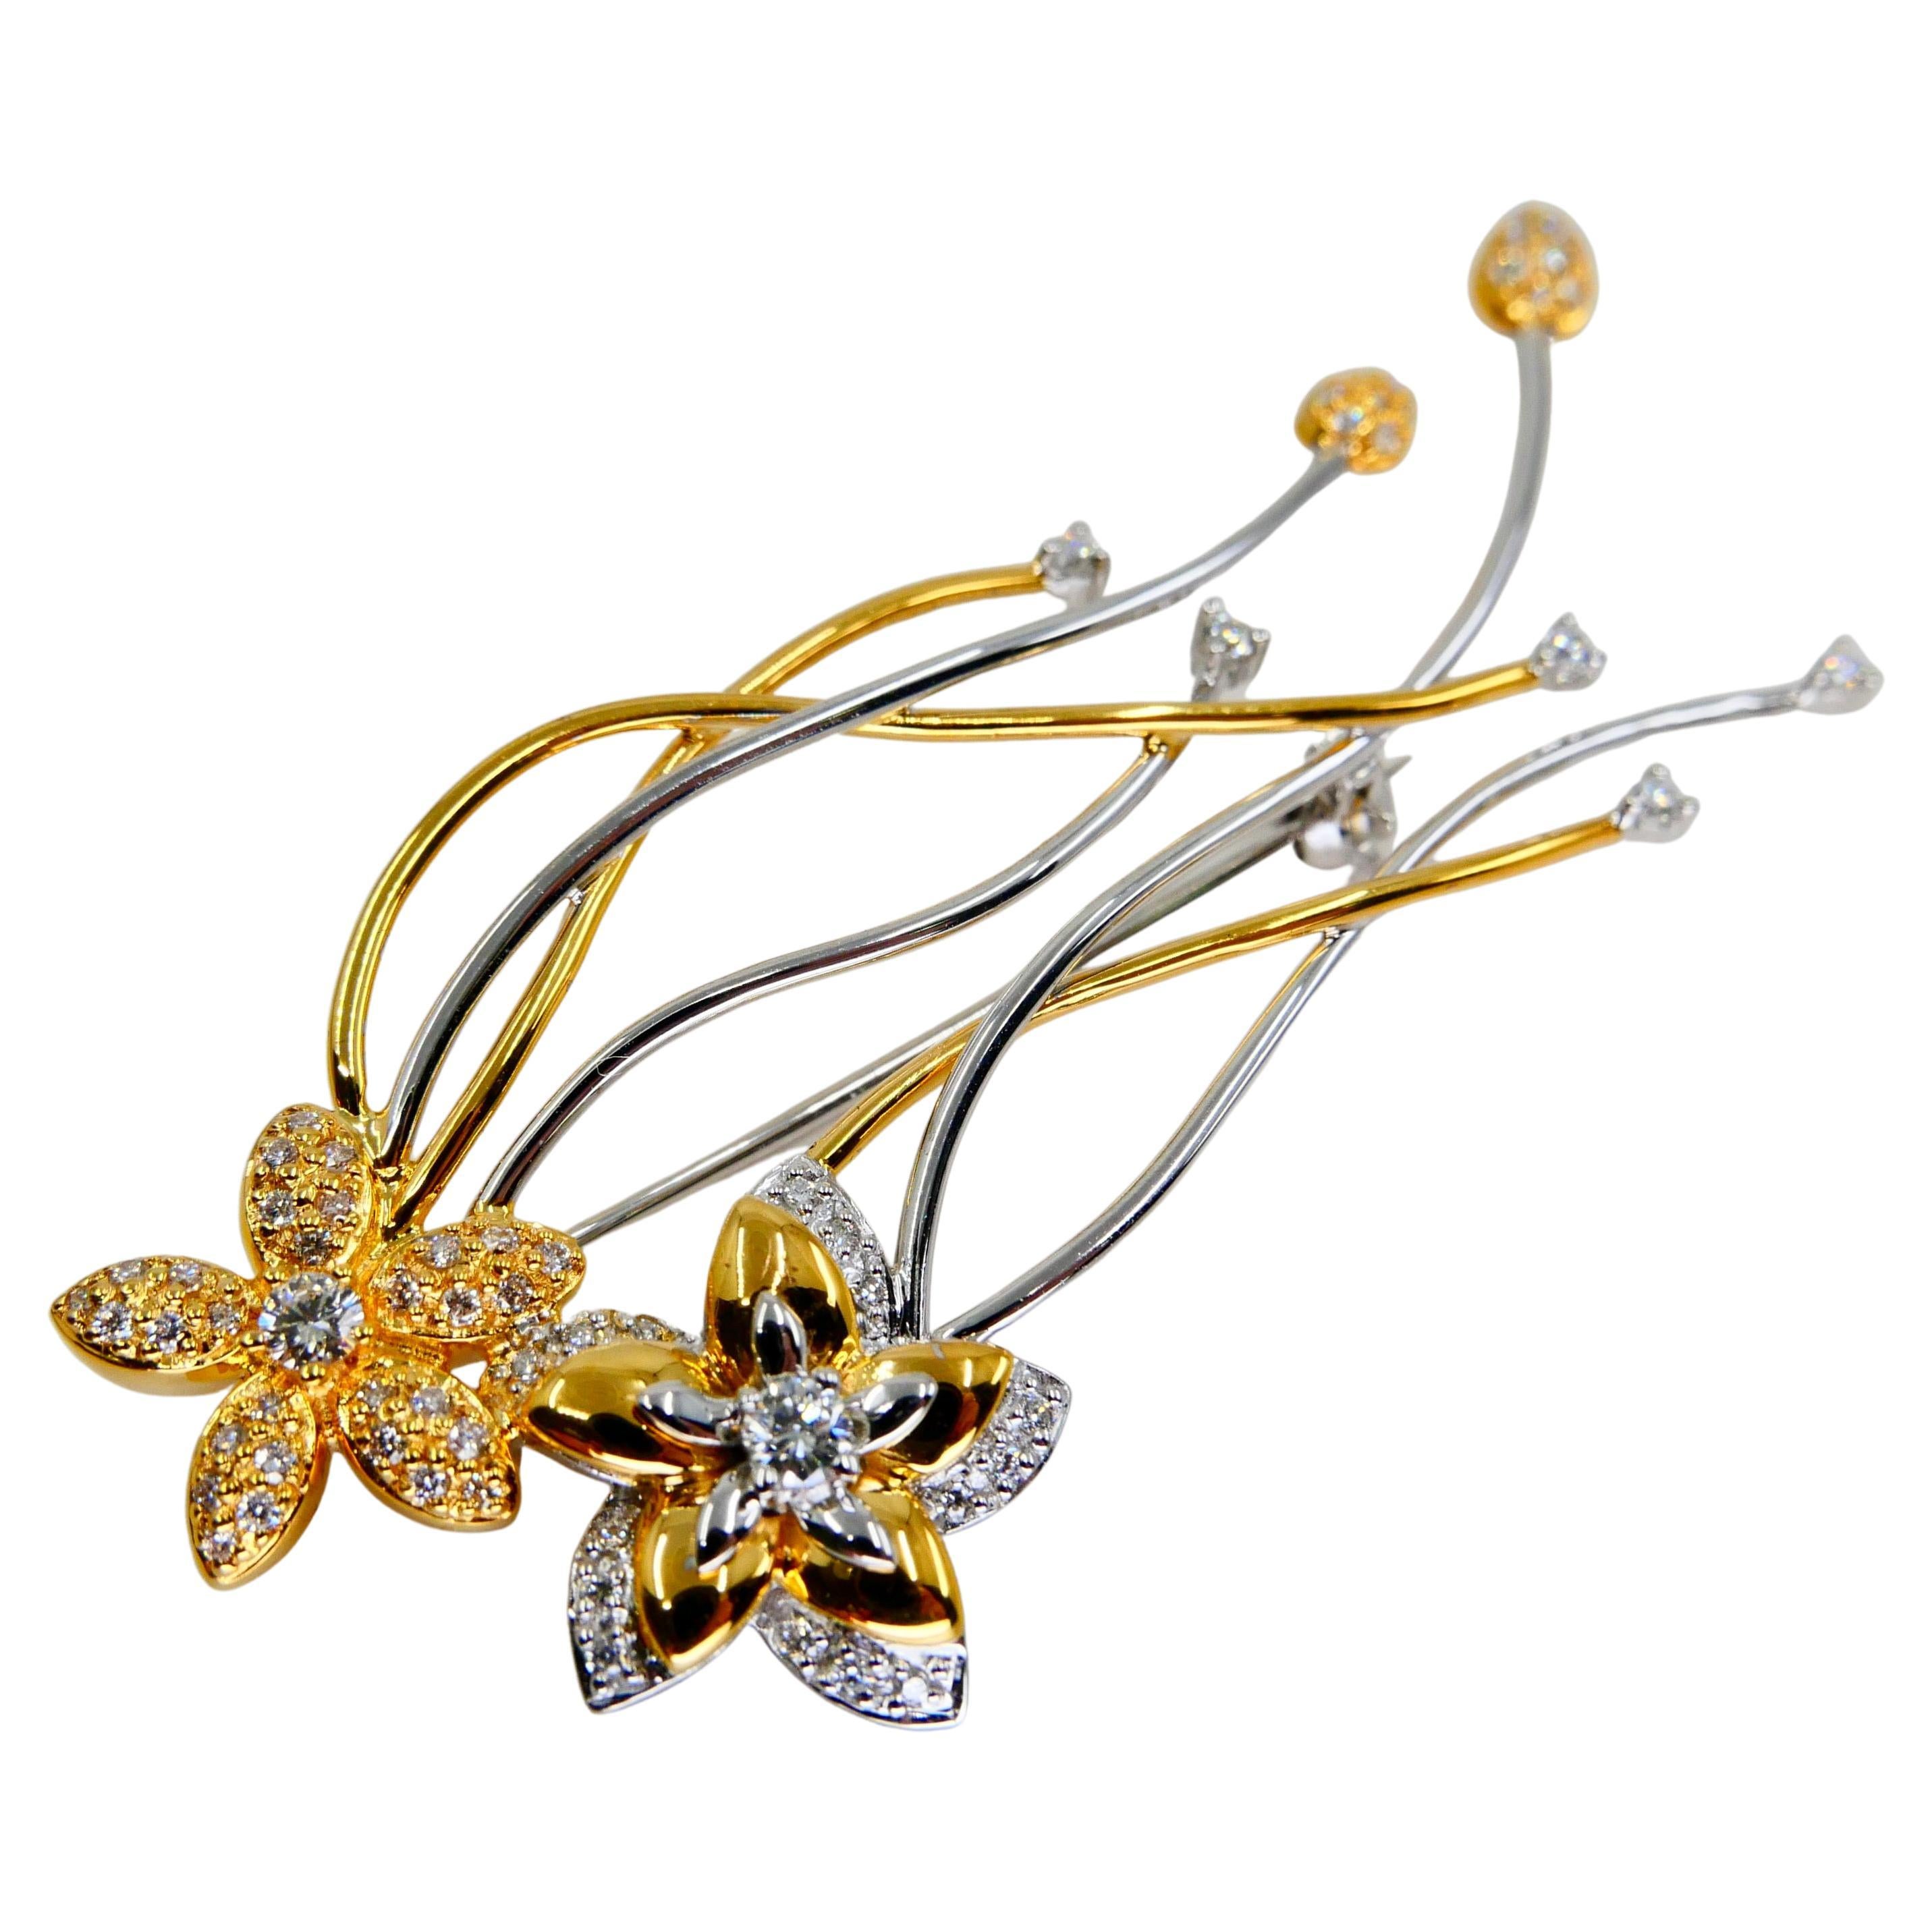 18K Two Tone White & Yellow Gold, Diamond Flower Brooch, Beautiful Workmanship For Sale